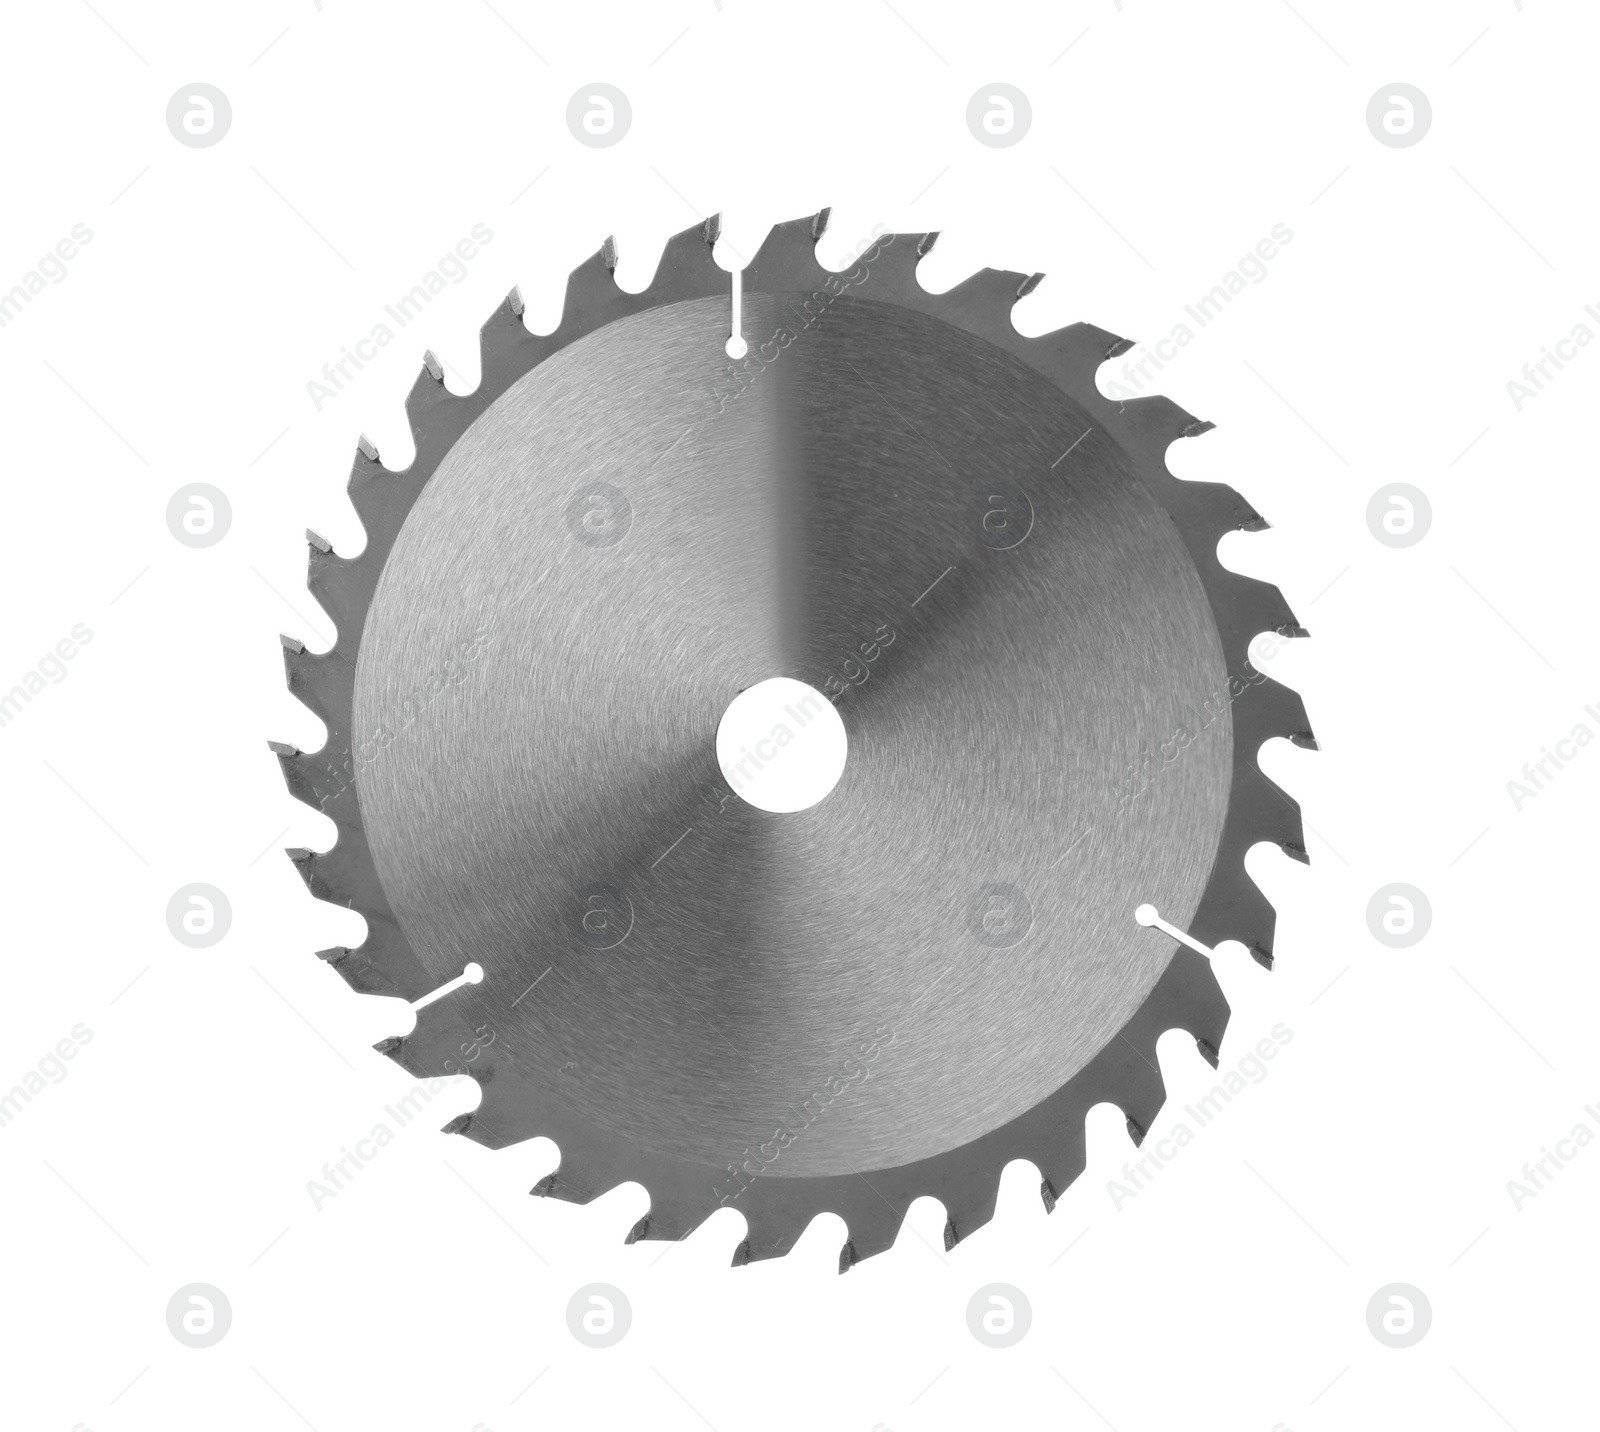 Photo of Saw disk isolated on white. Carpenter's tool